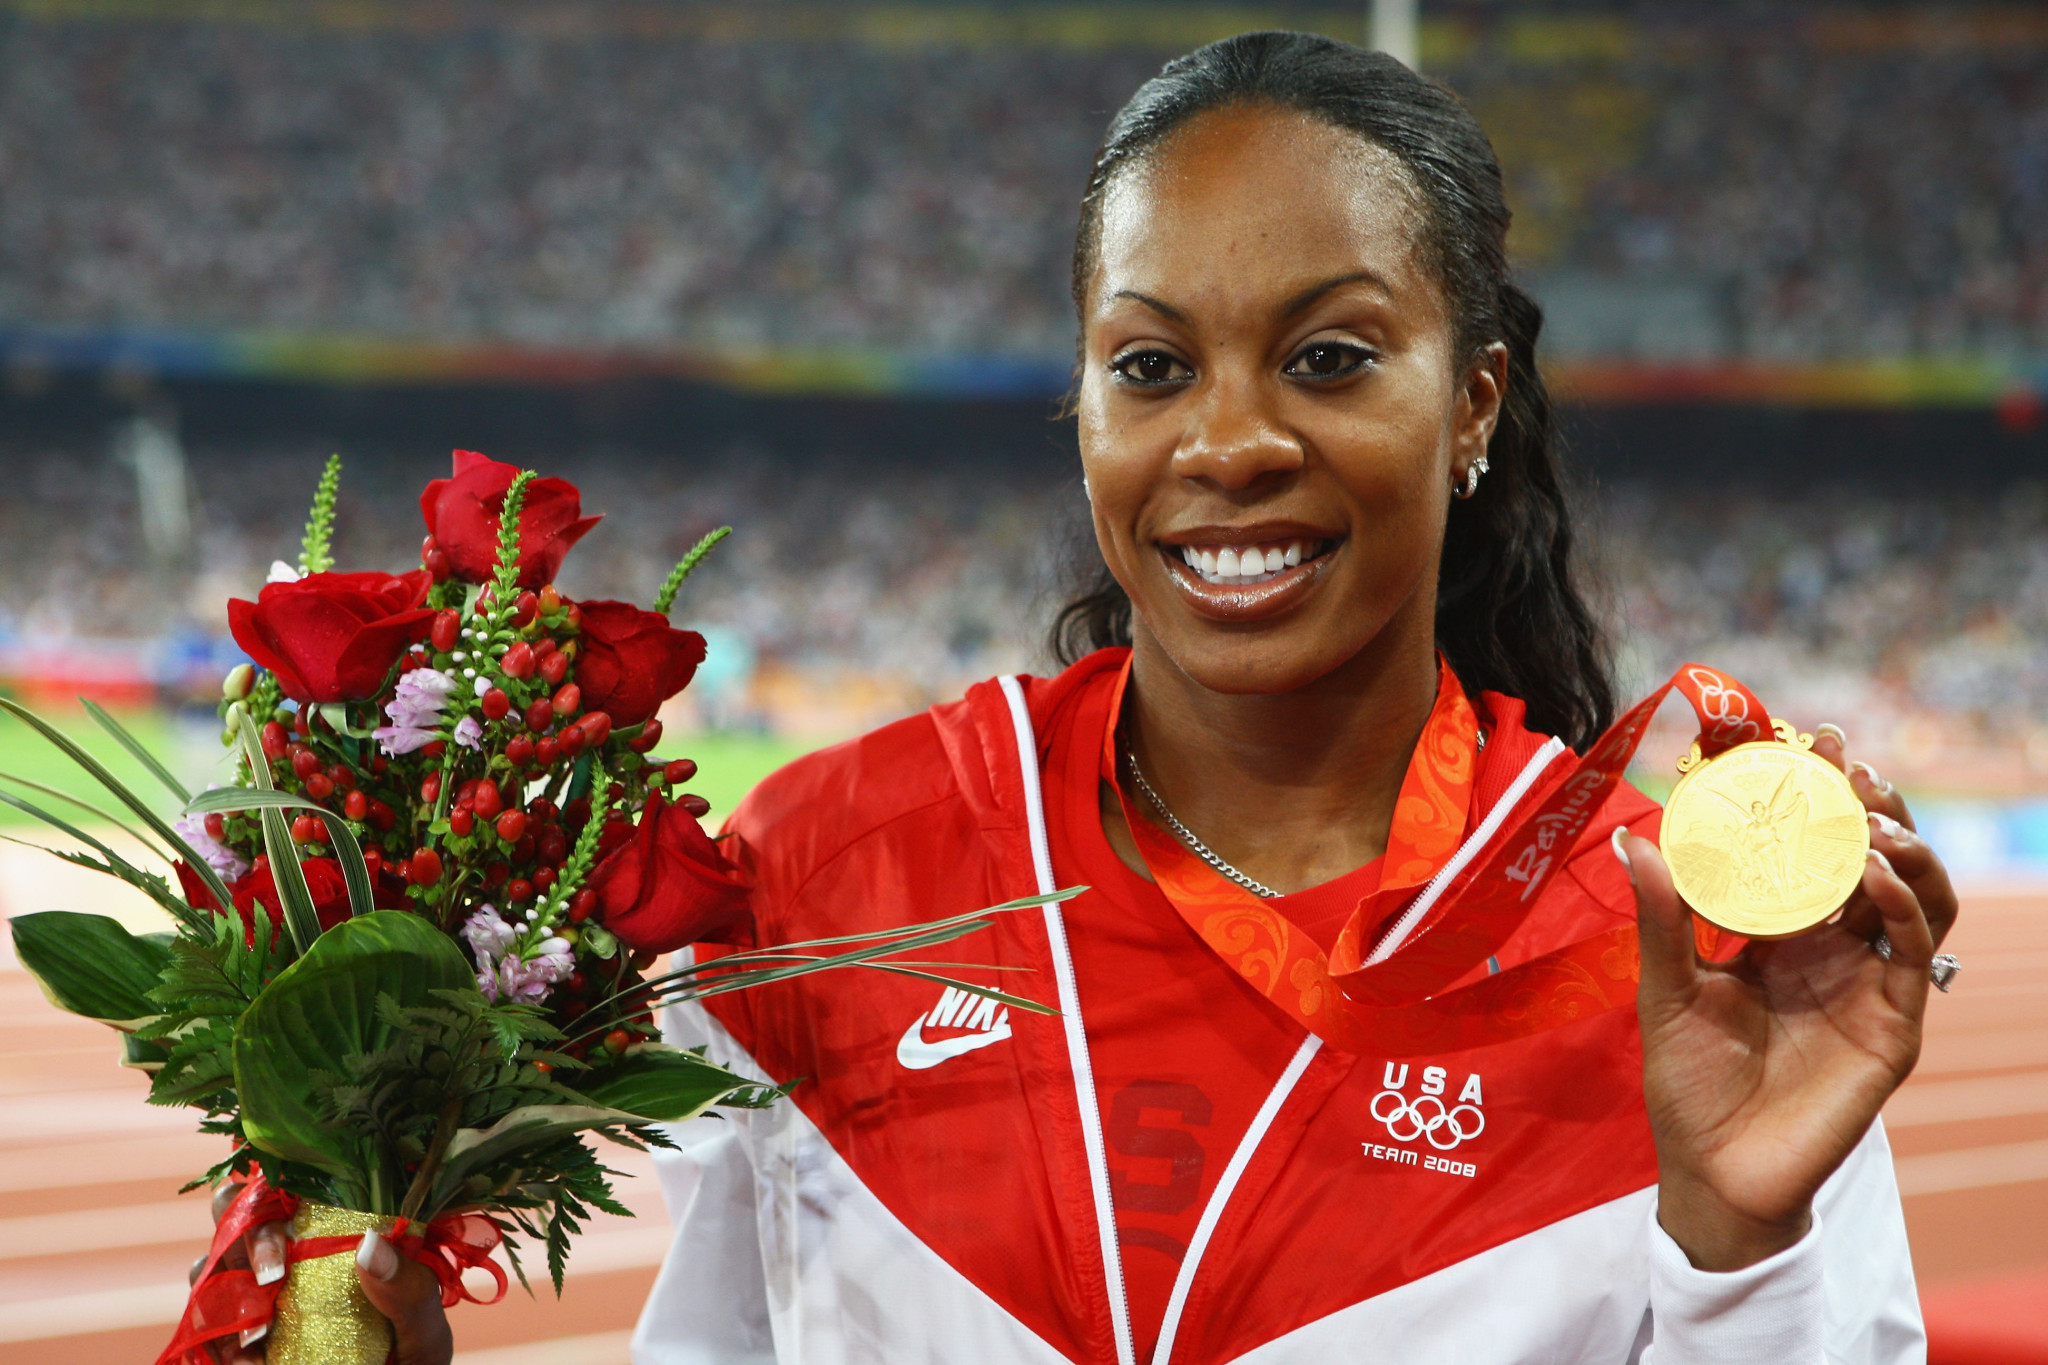 United States sprinter Sanya Richards-Ross admitted in her autobiography that she had an abortion two weeks before travelling to Beijing 2008, where she won an Olympic gold medal in the 4x400 metres relay ©Getty Images